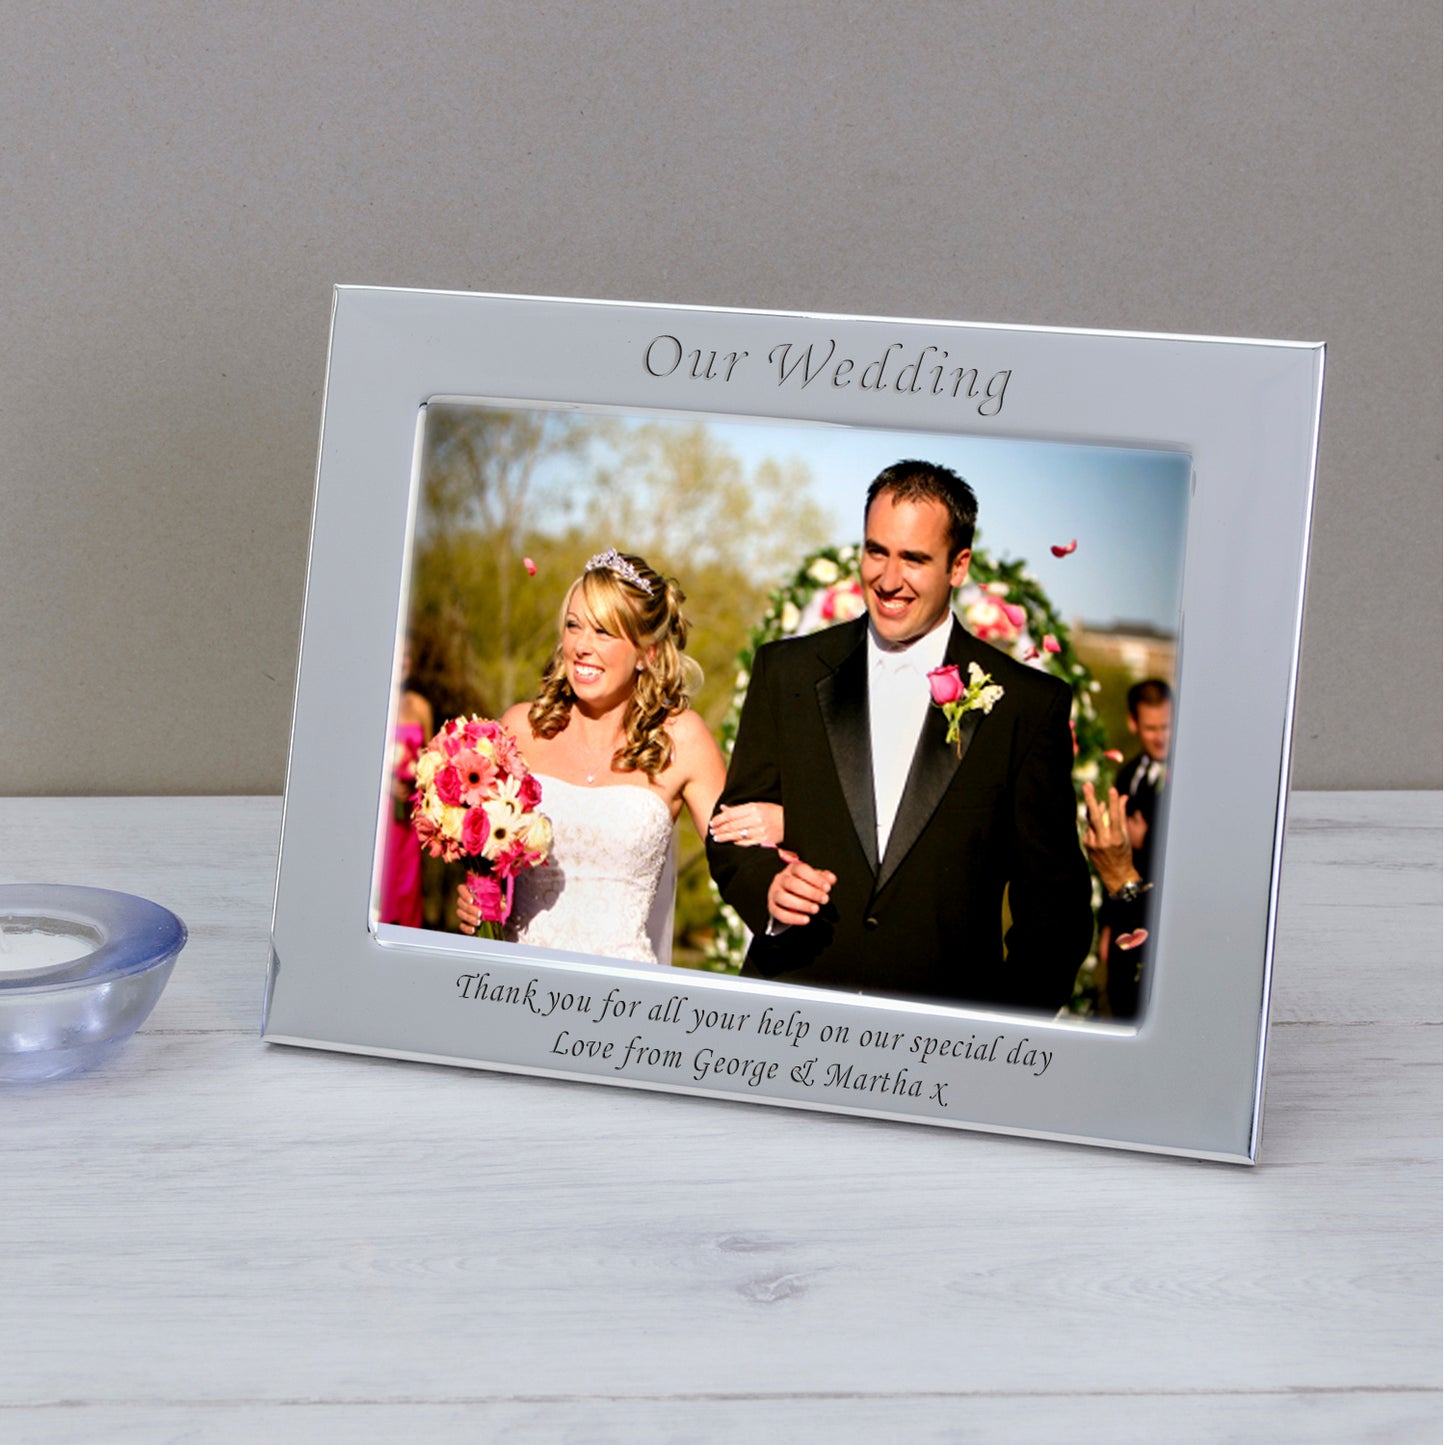 Engraved Our Wedding Silver Plated Photo Frame 6x4